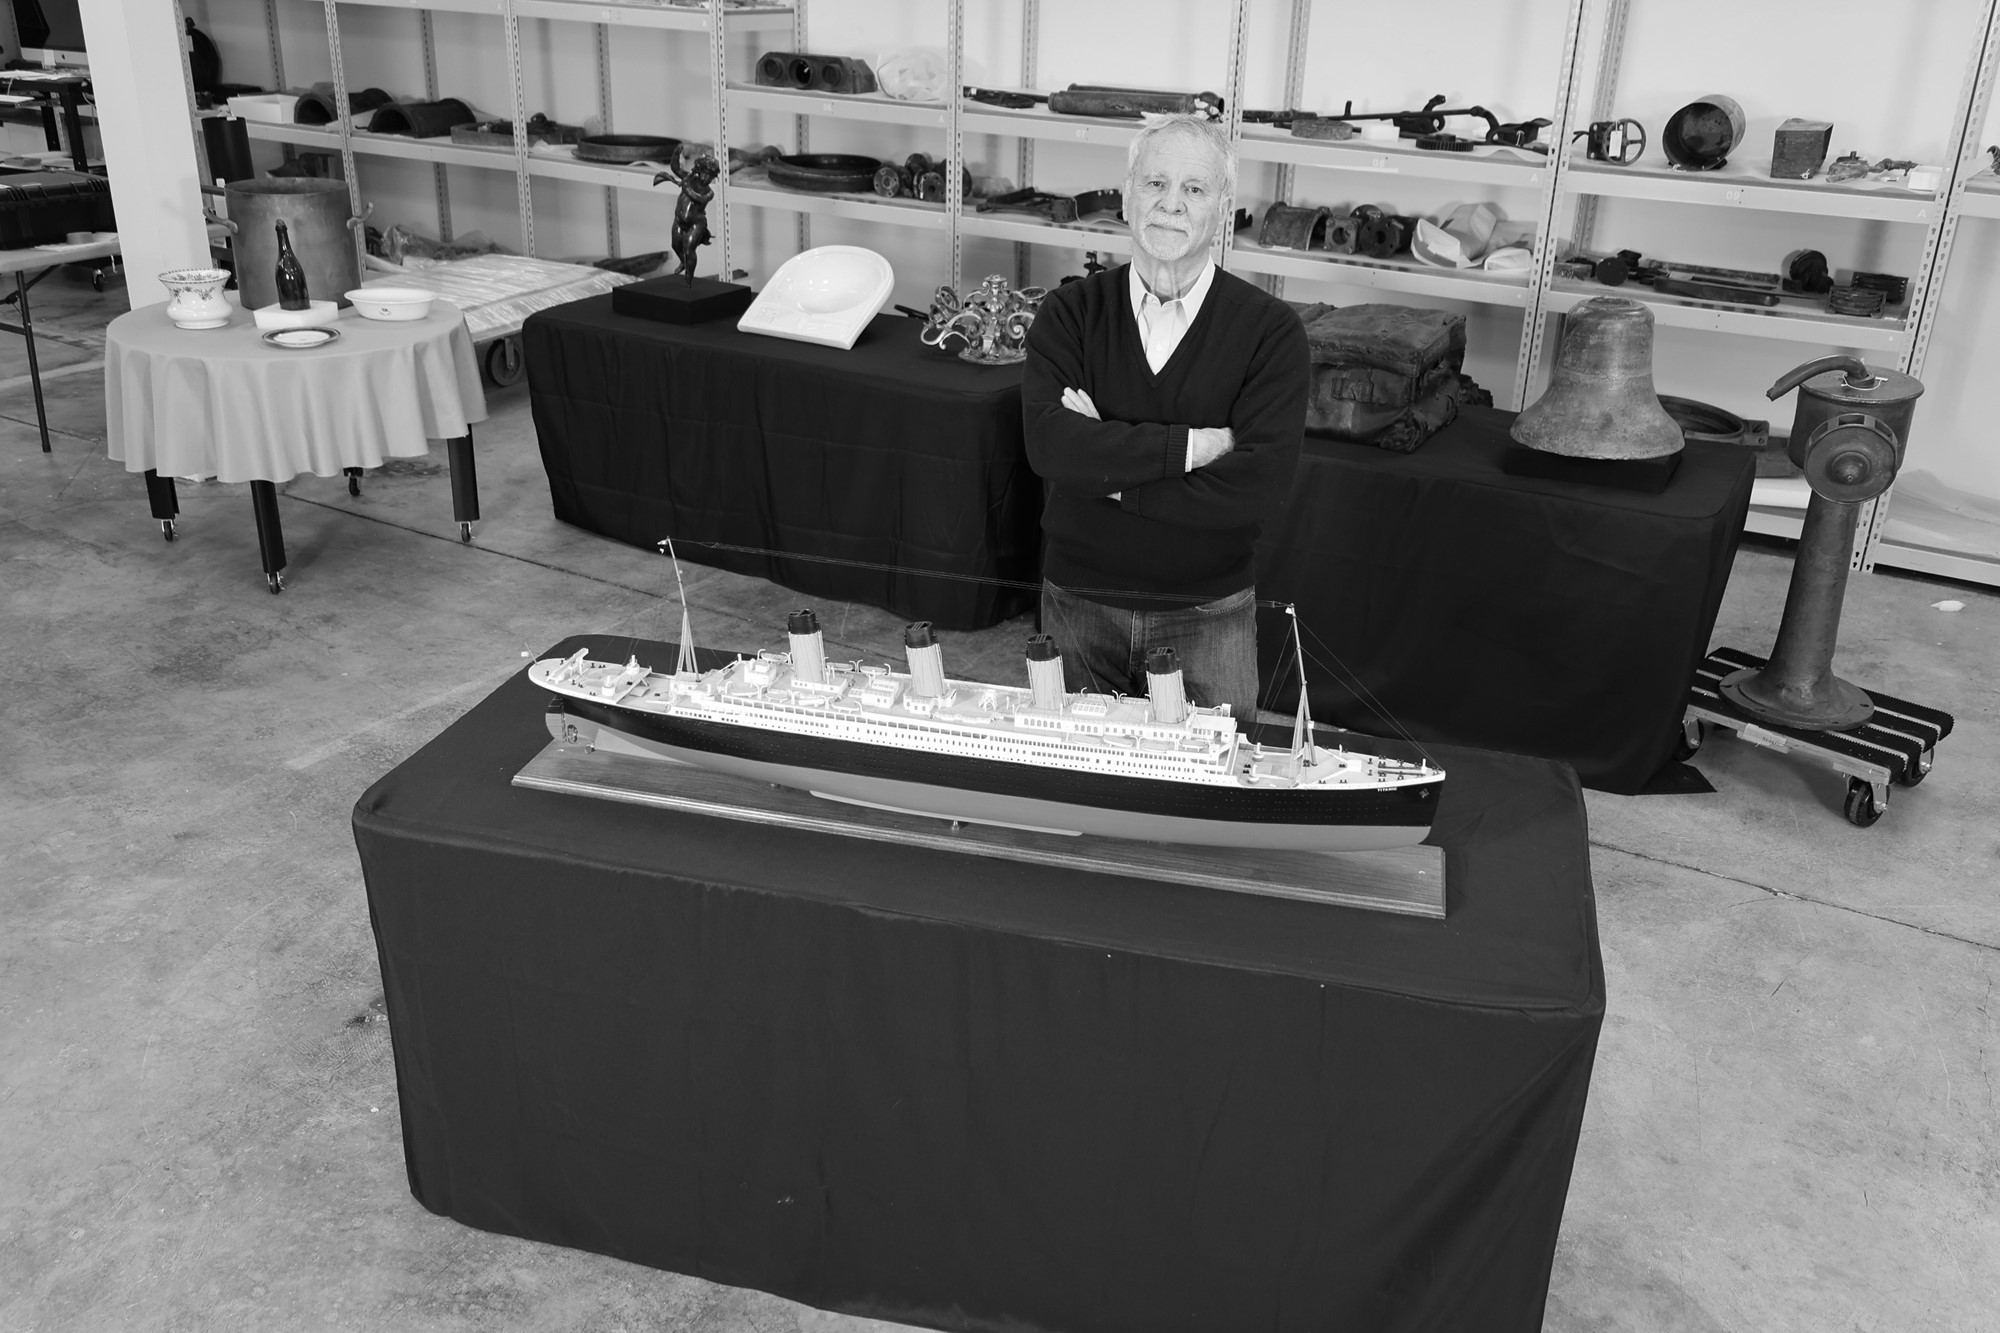 A black and white photo of an older man standing behind a model of the Titanic boat.